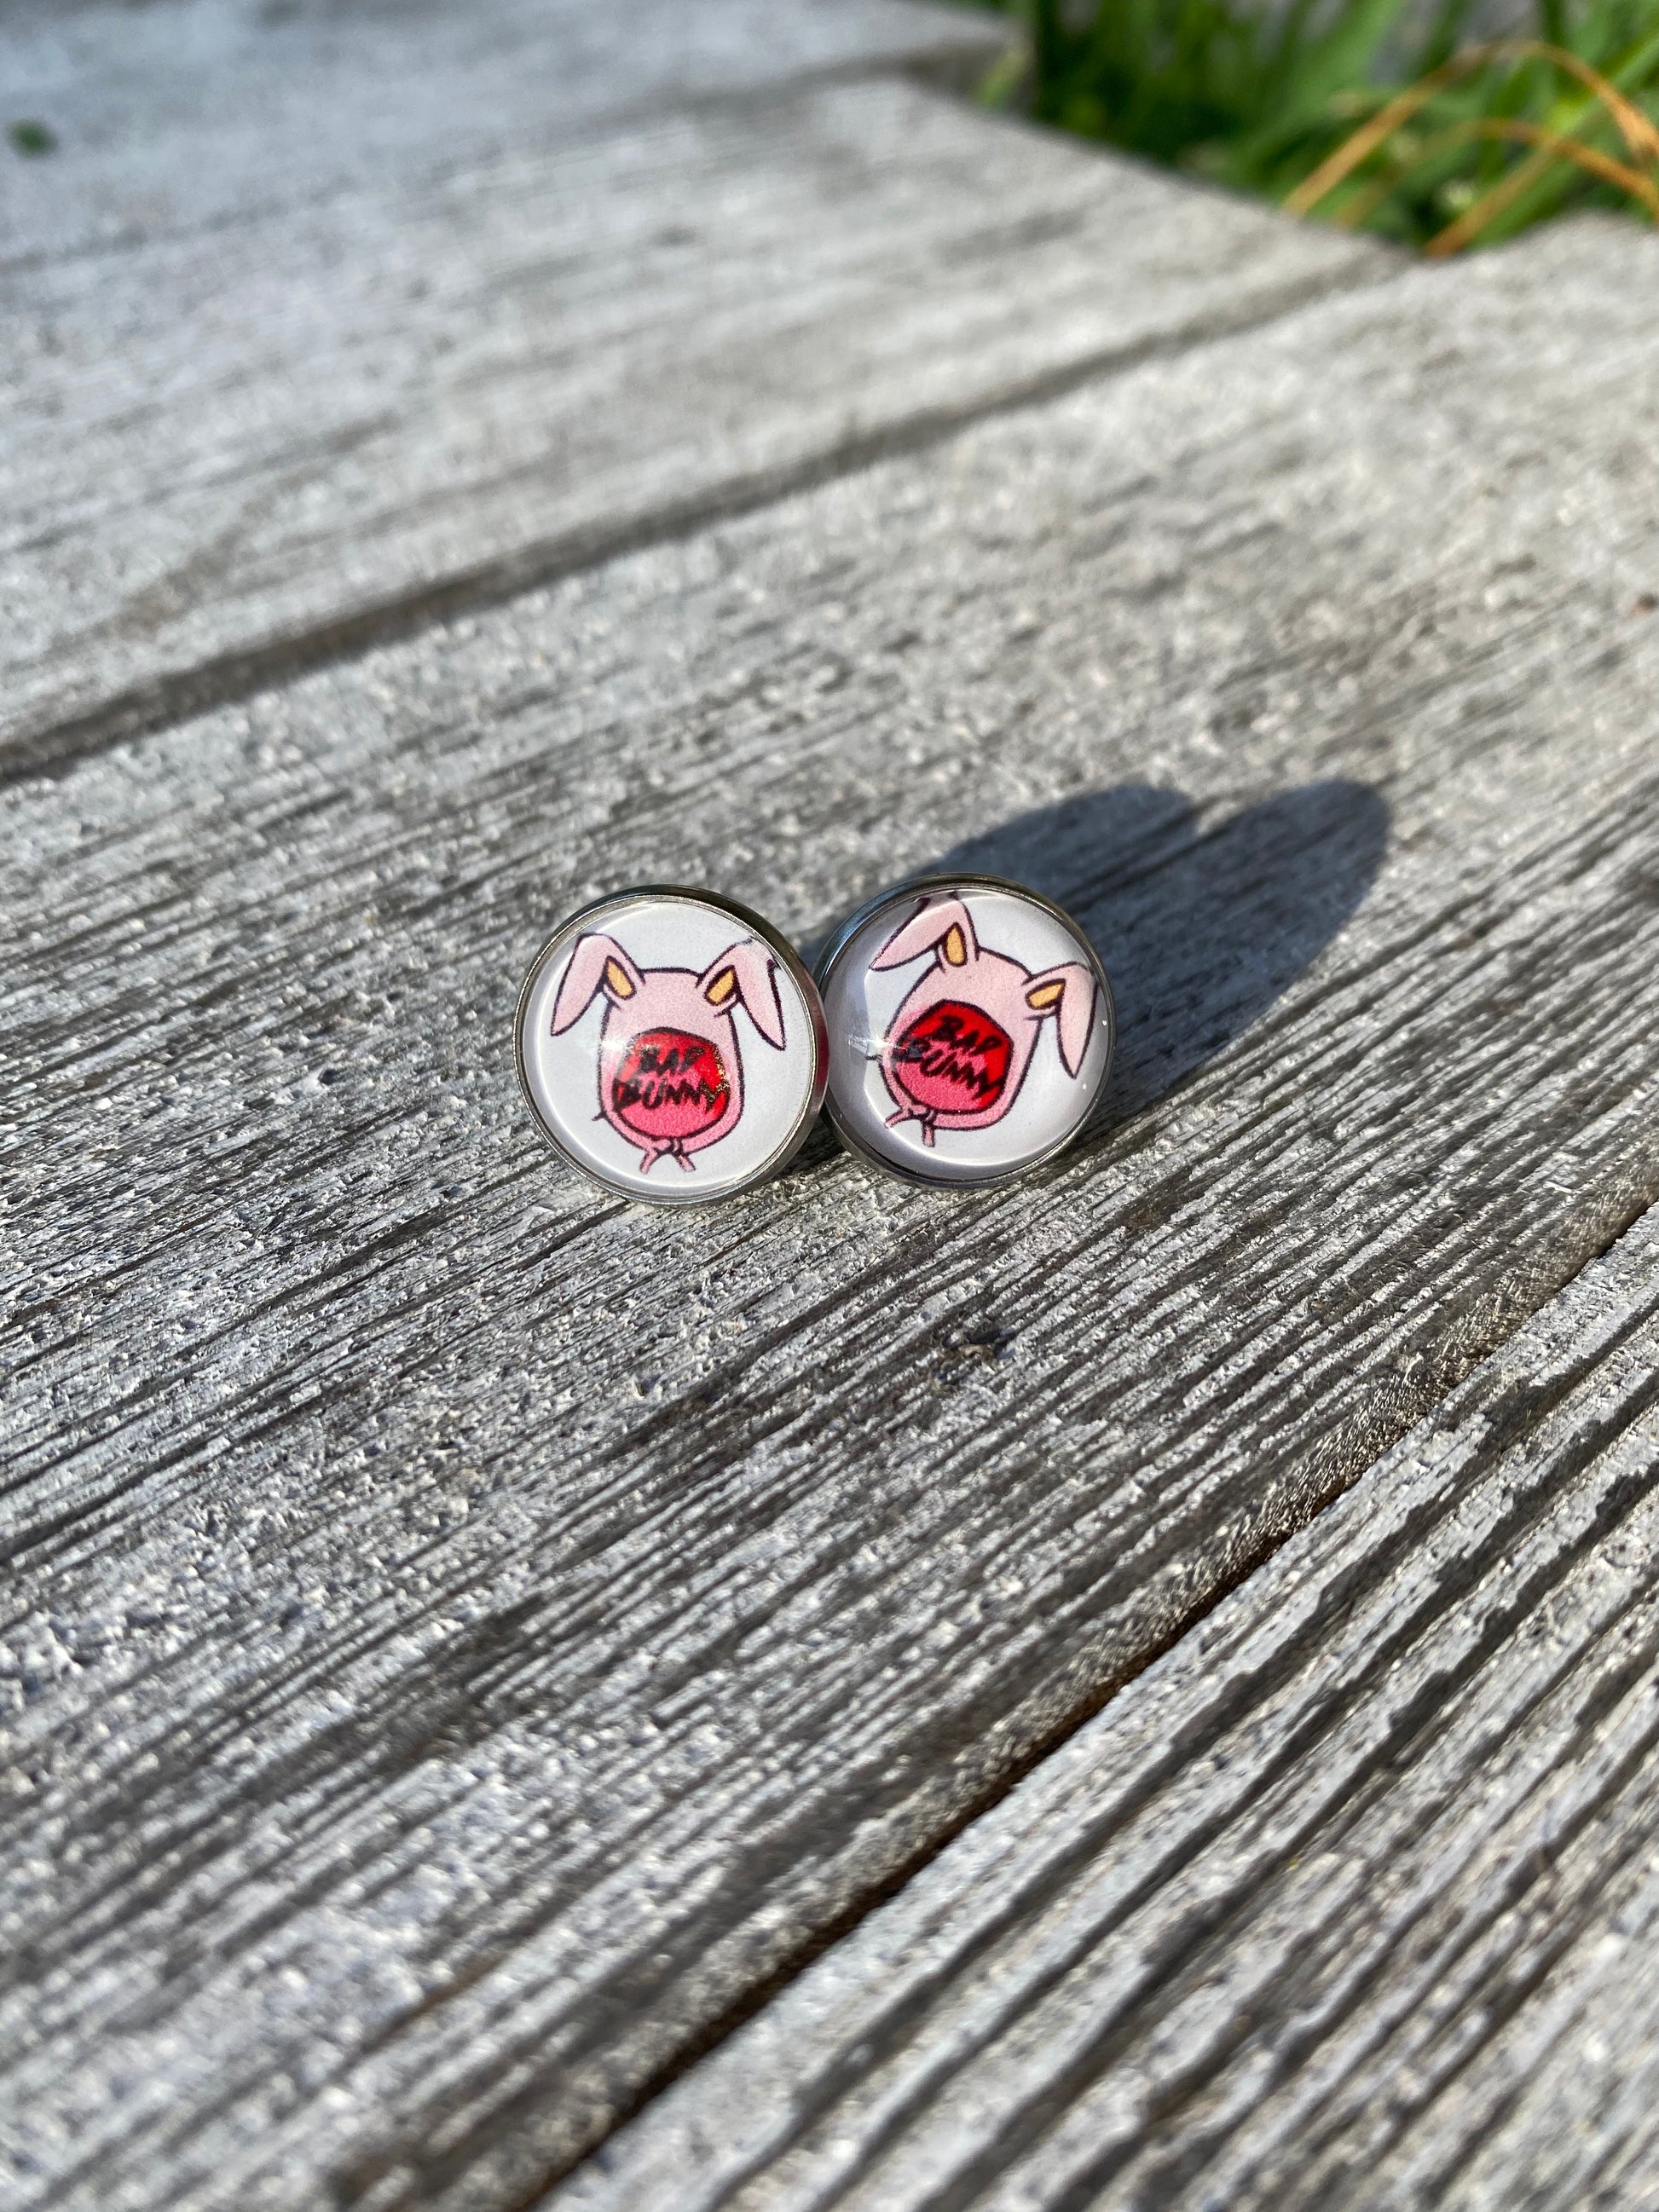  Bad Bunny Stud Earrings Party Favor Jewely 